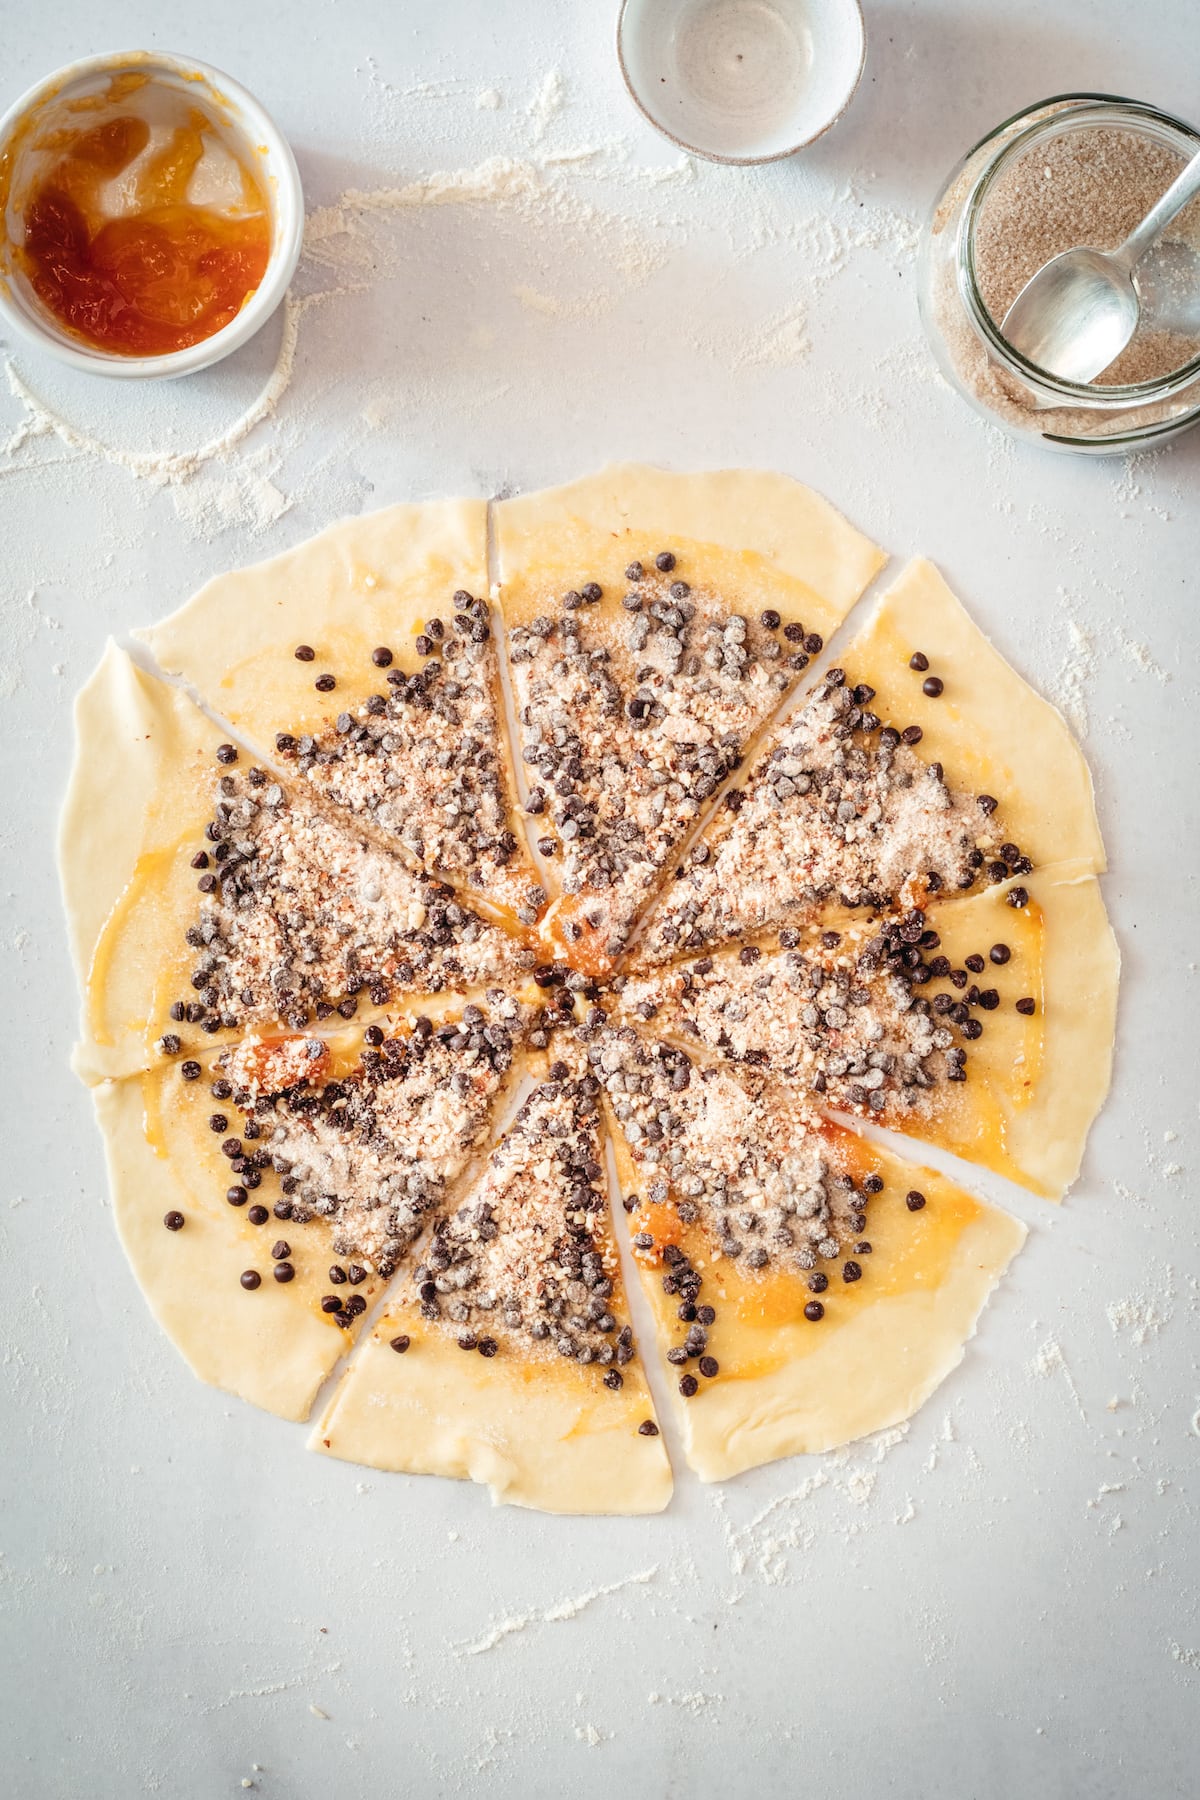 Triangles of rugelach dough topped with filling ingredients